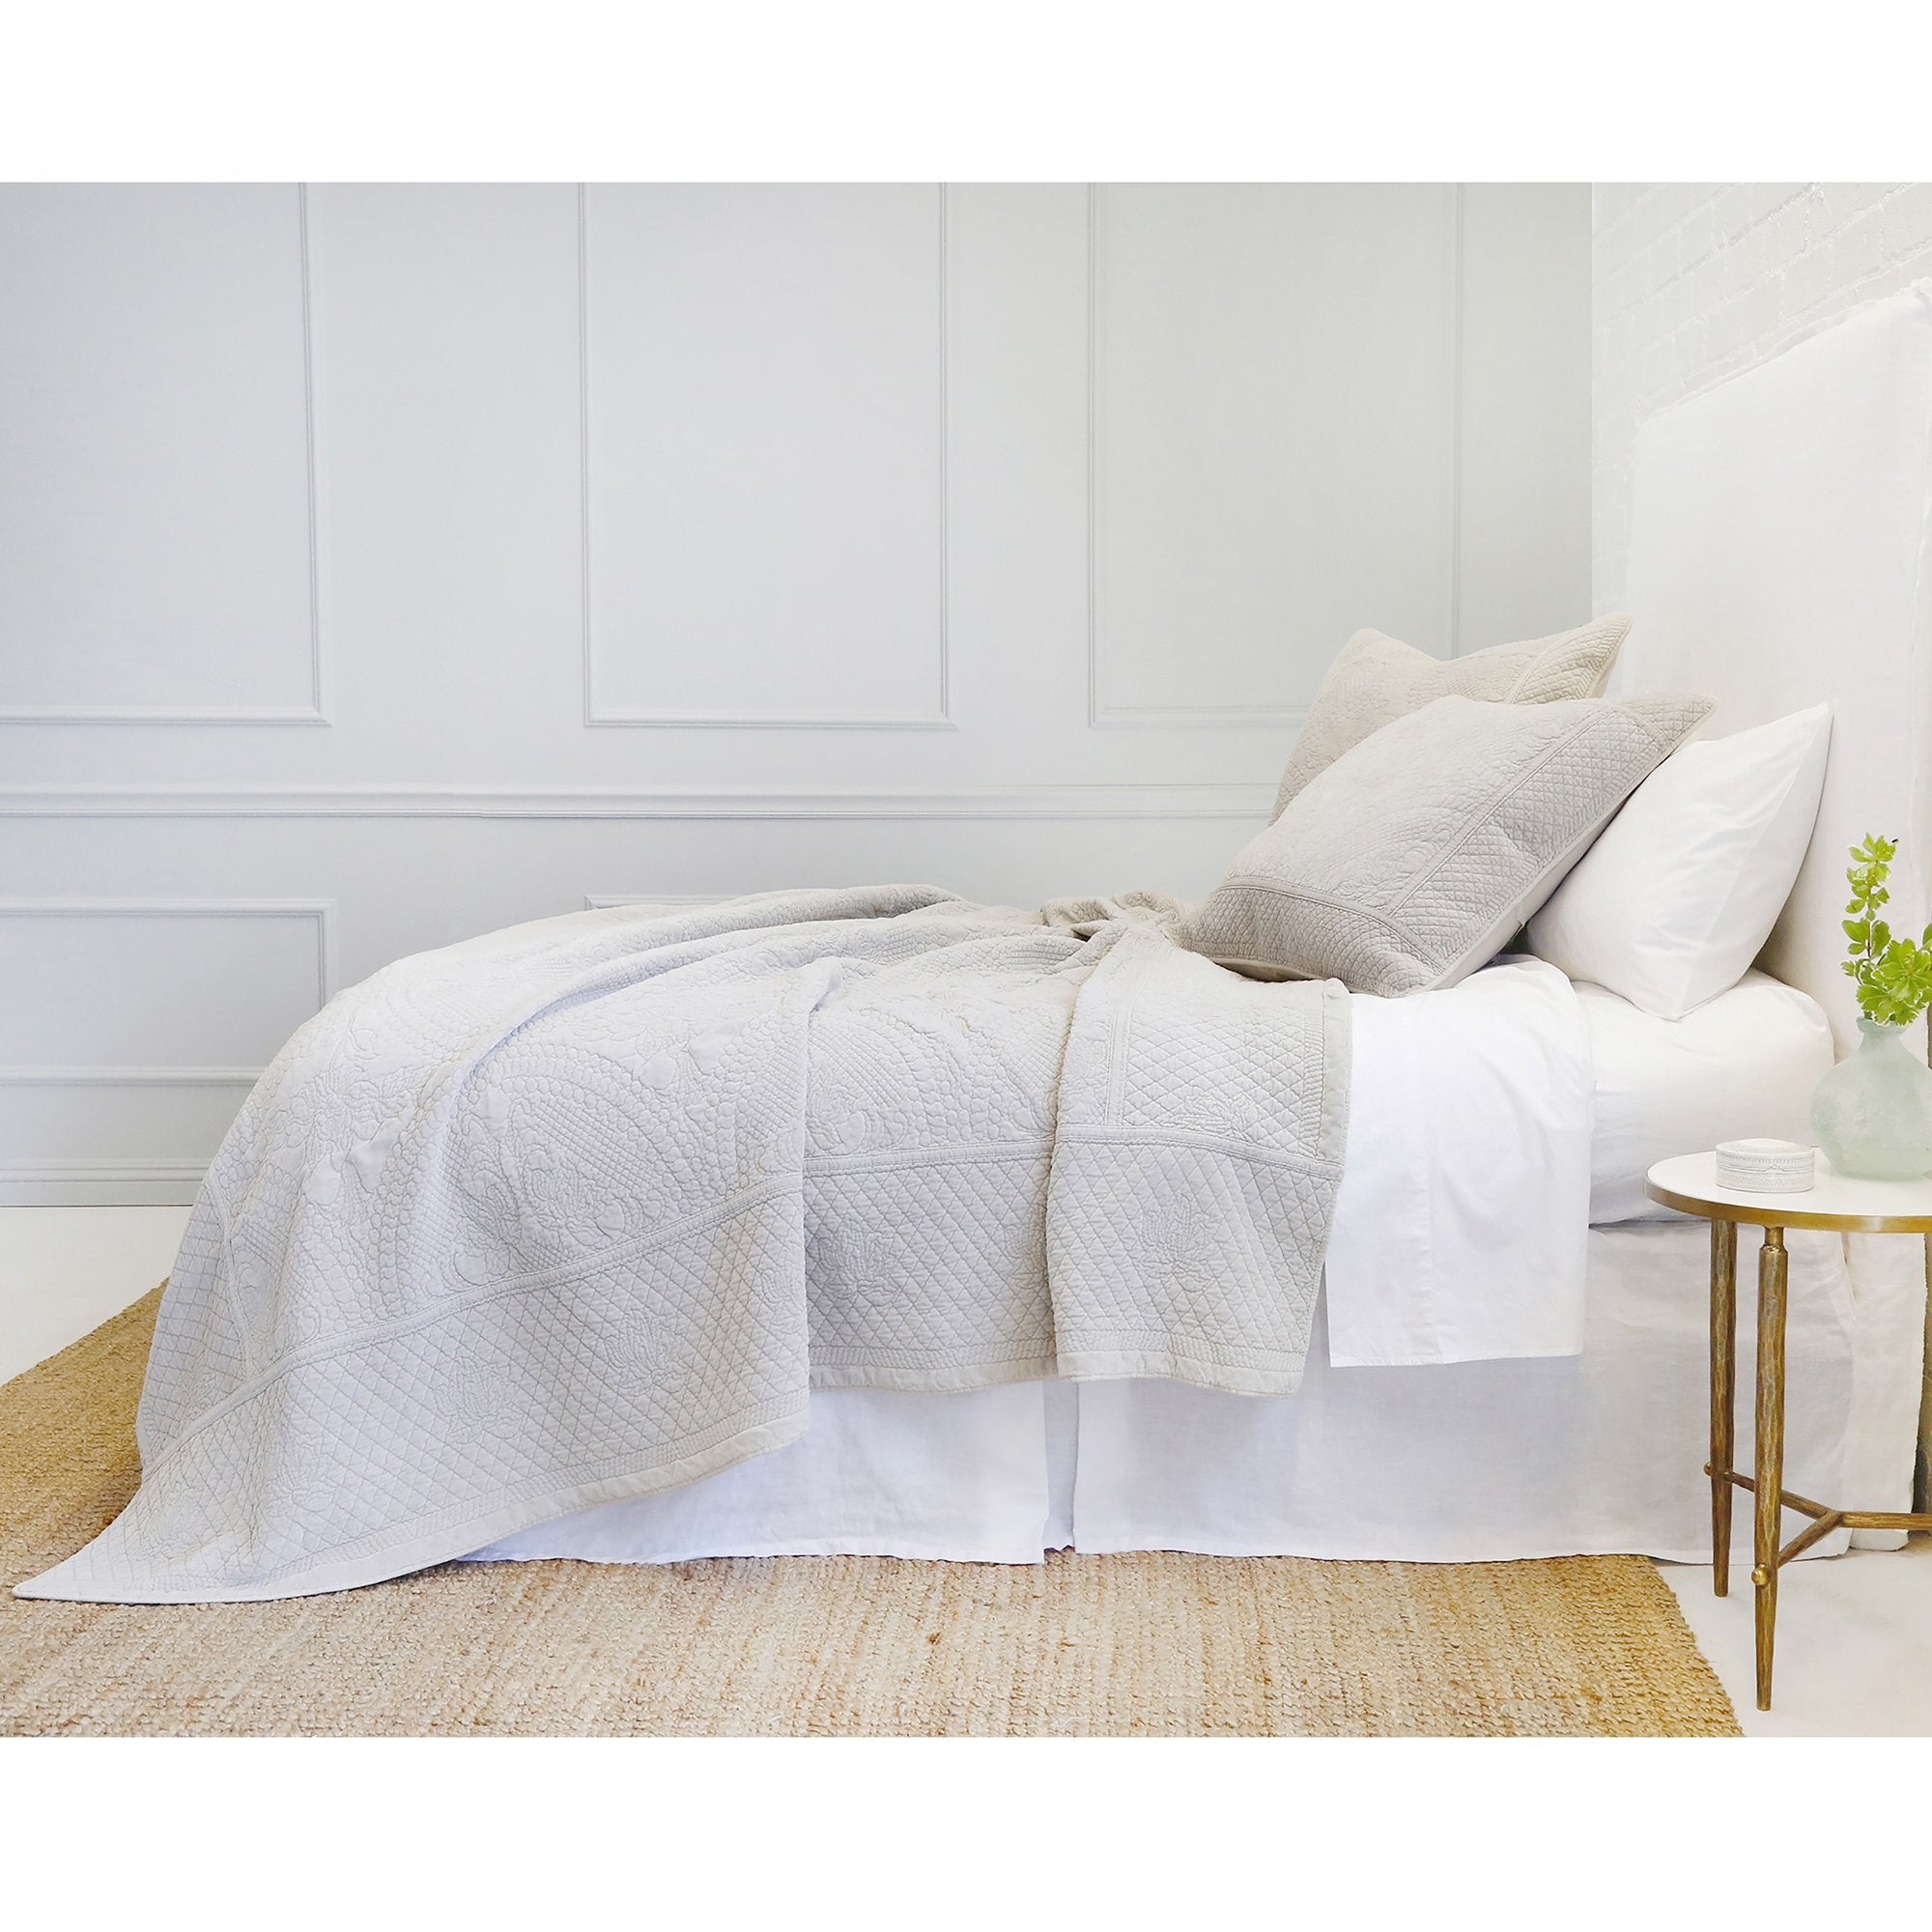 The Marseille Coverlet Bedding Taupe by Pom Pom at Home is luxurious and elegant with a detailed floral and diamond quilted pattern on the front made of 100% stone washed cotton velvet.  100% cotton velvet Machine wash cold; tumble dry low; warm iron as needed Do not bleach 